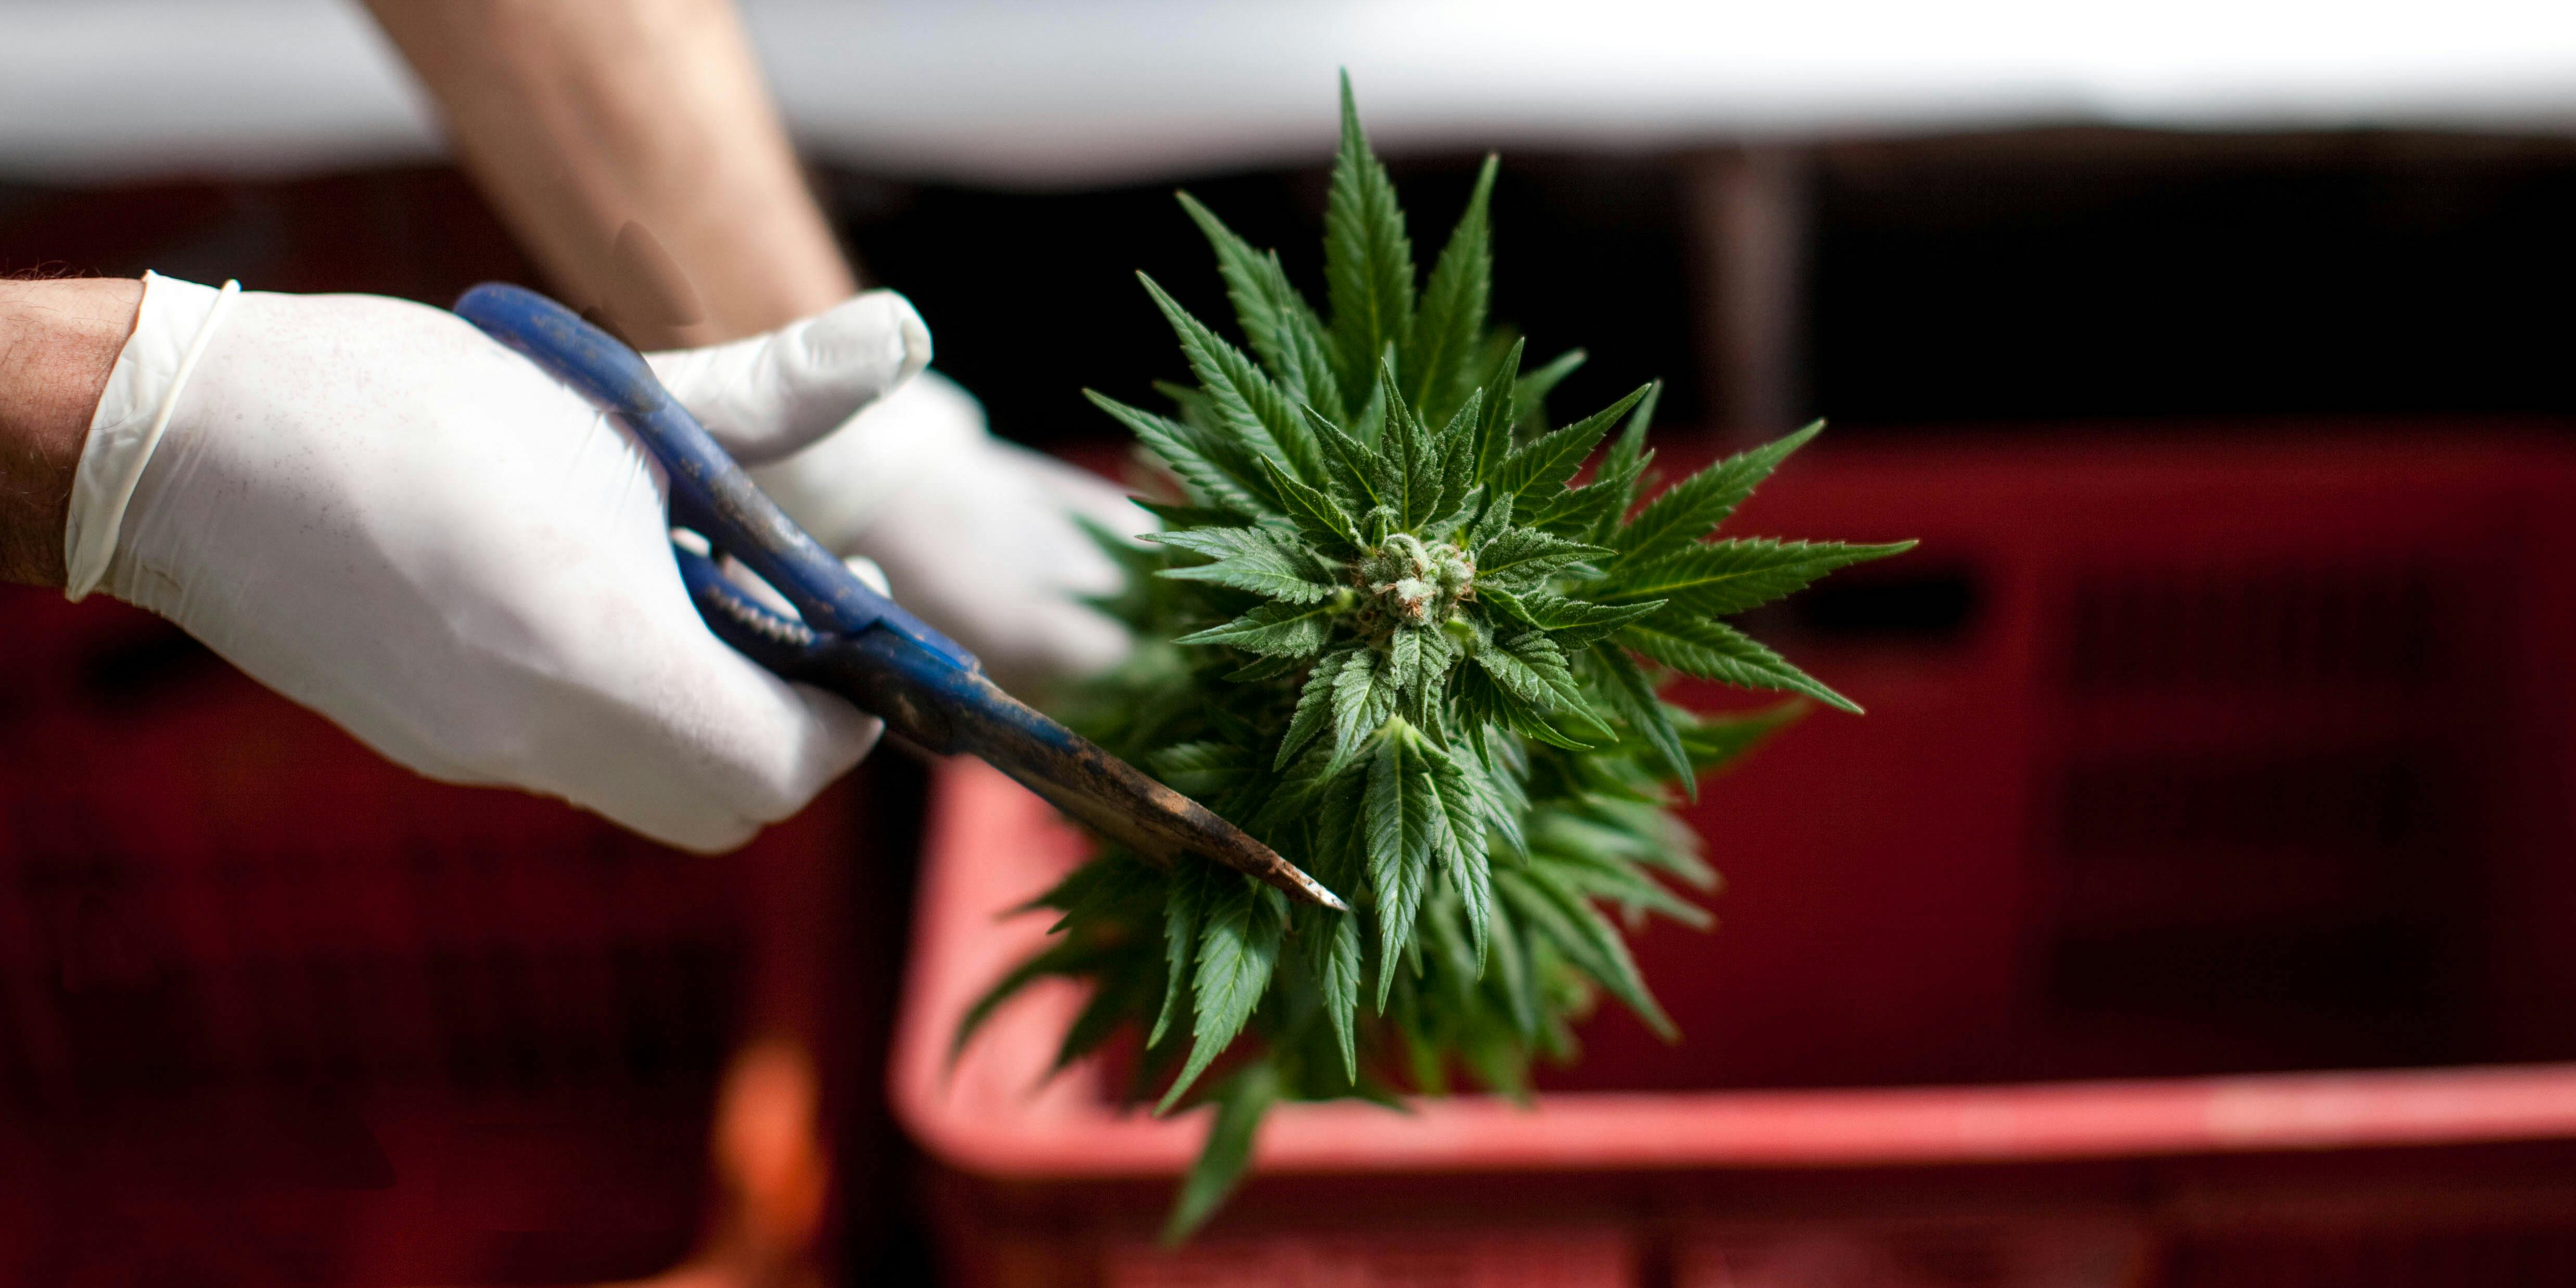 A worker trims cannabis at a growing facility. In California, laboratory results recently revealed that one in five batches of marijuana has failed testing due to pesticides or mislabelling.